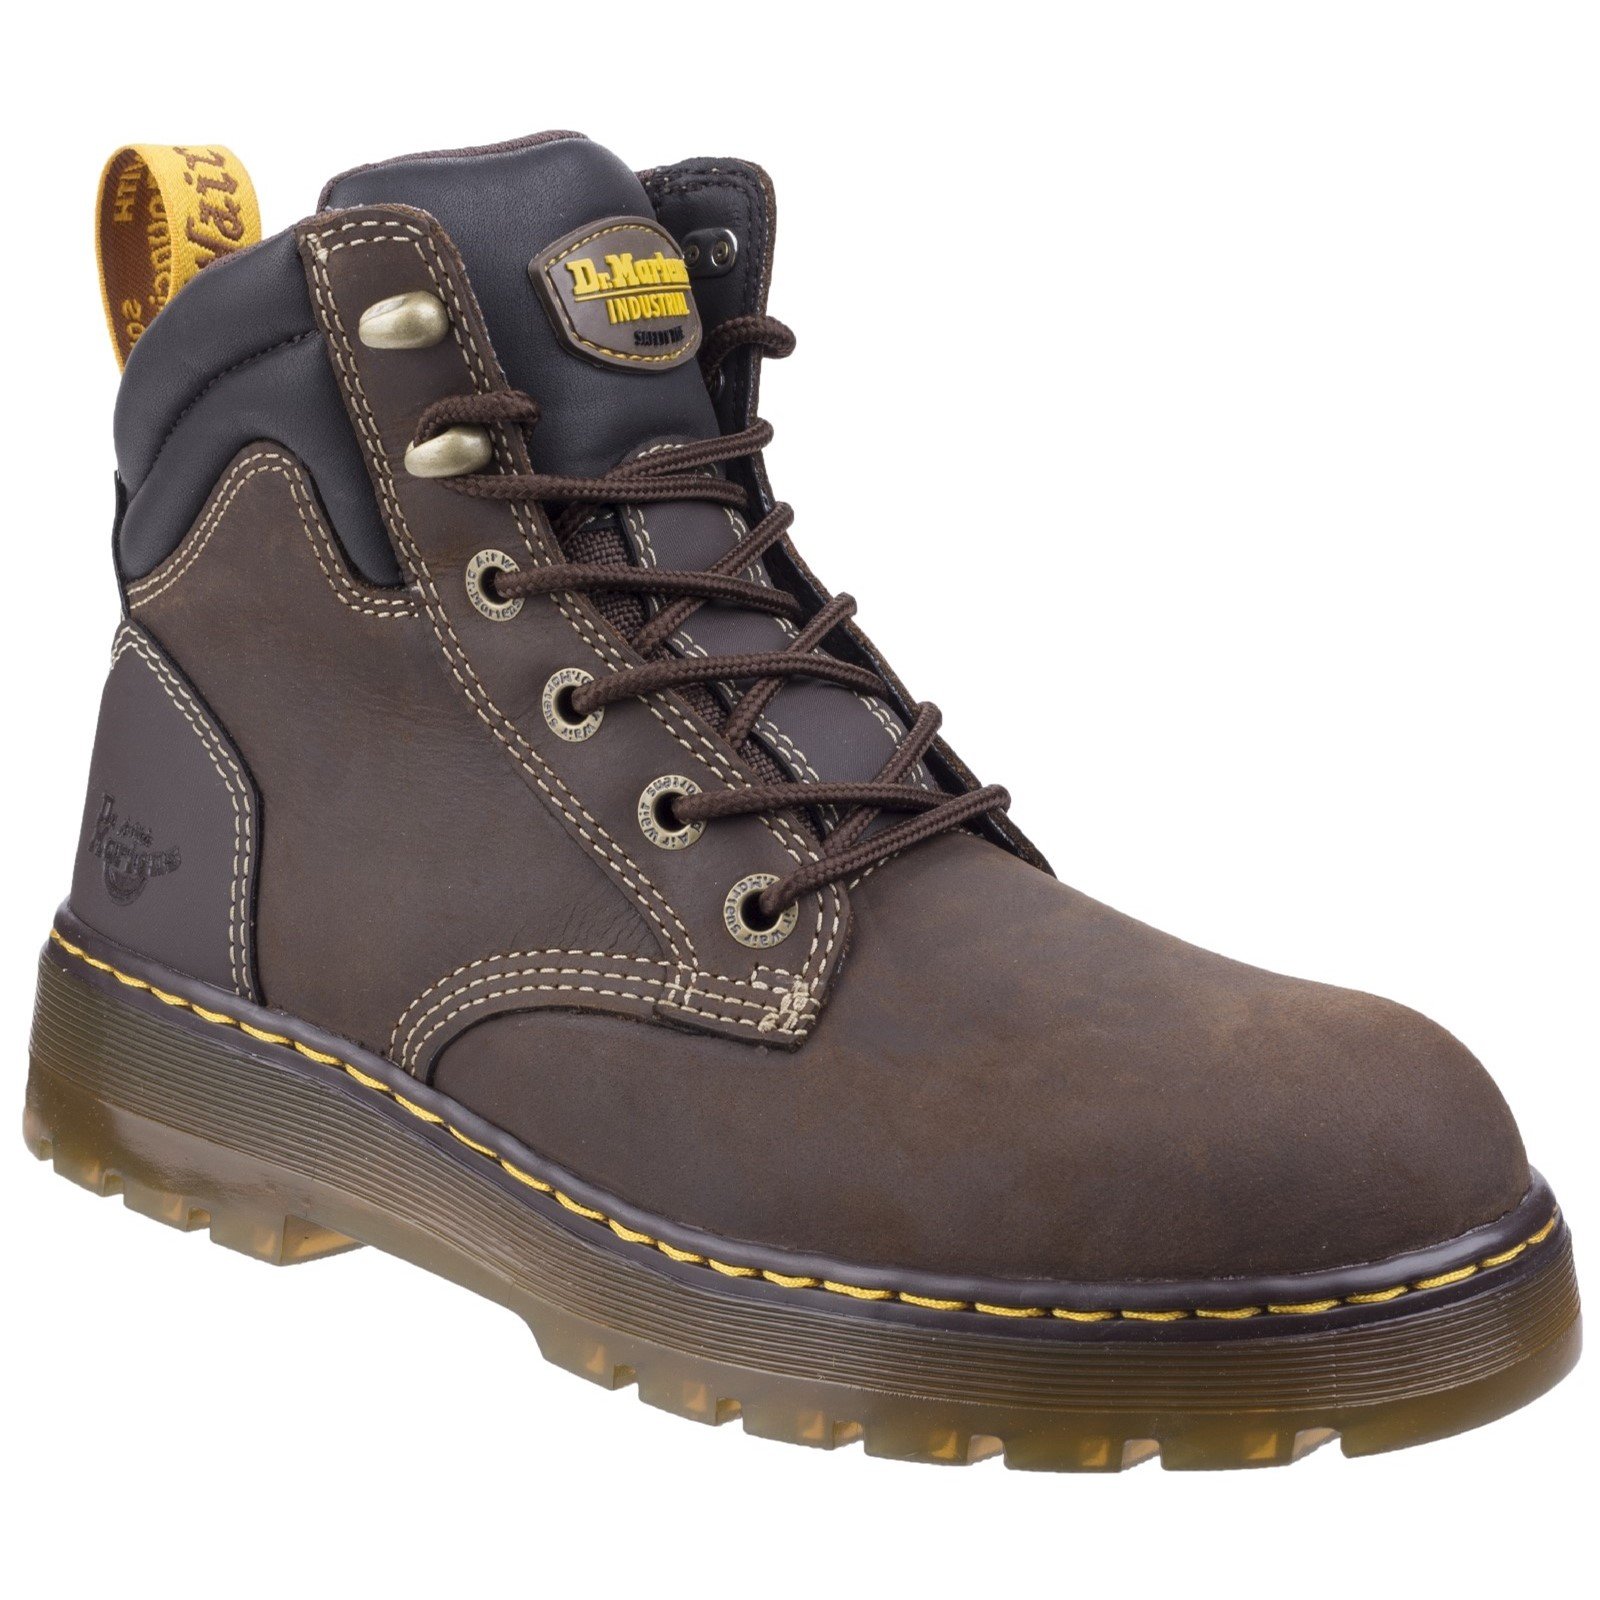 Dr Martens Unisex Brace Hiking Style Safety Boot Various Colours 27702-46606 - Dark Brown Republic 10